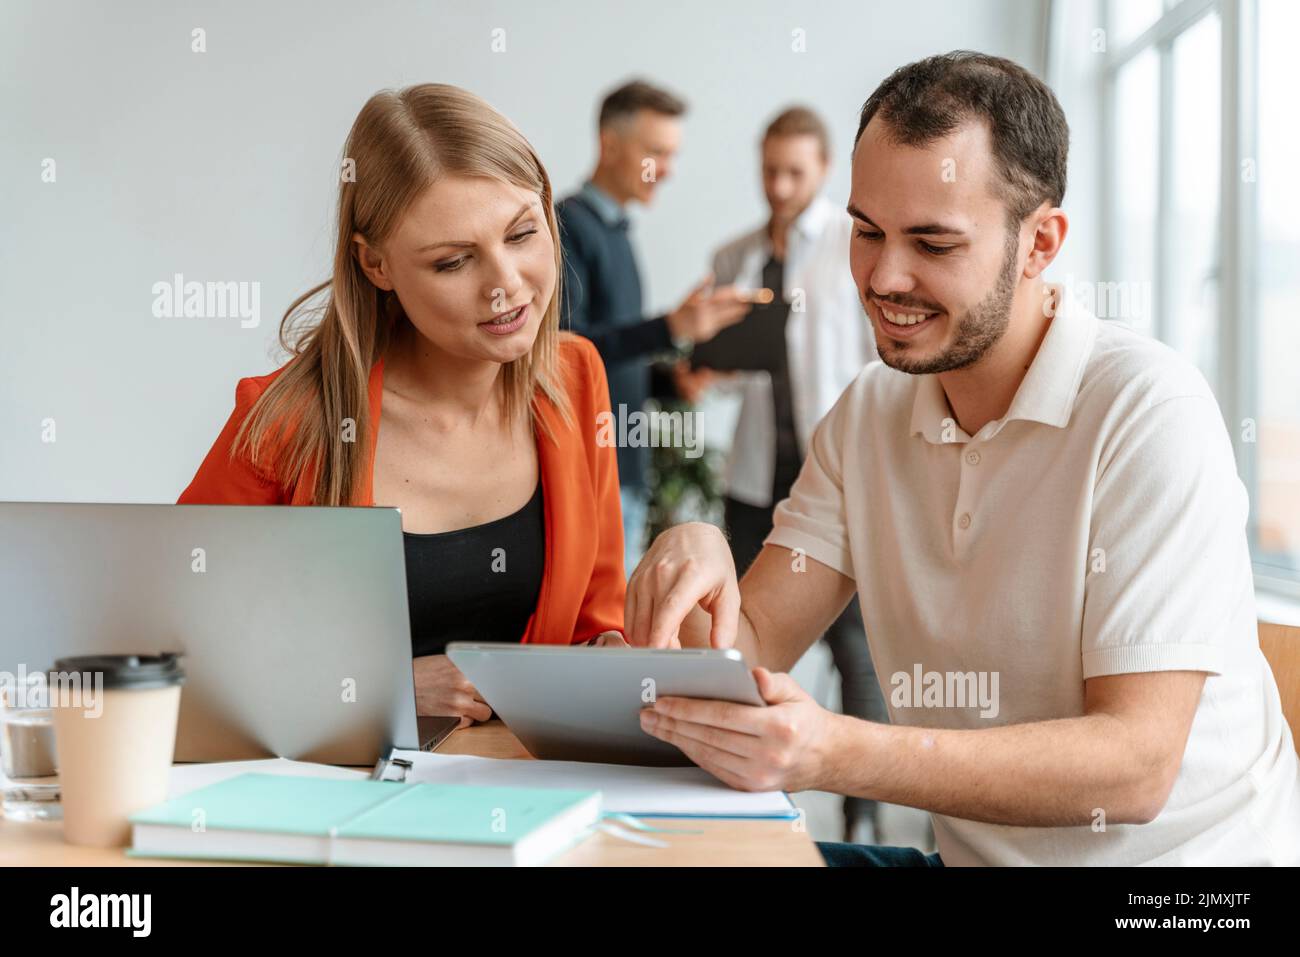 Young business people working laptop Stock Photo